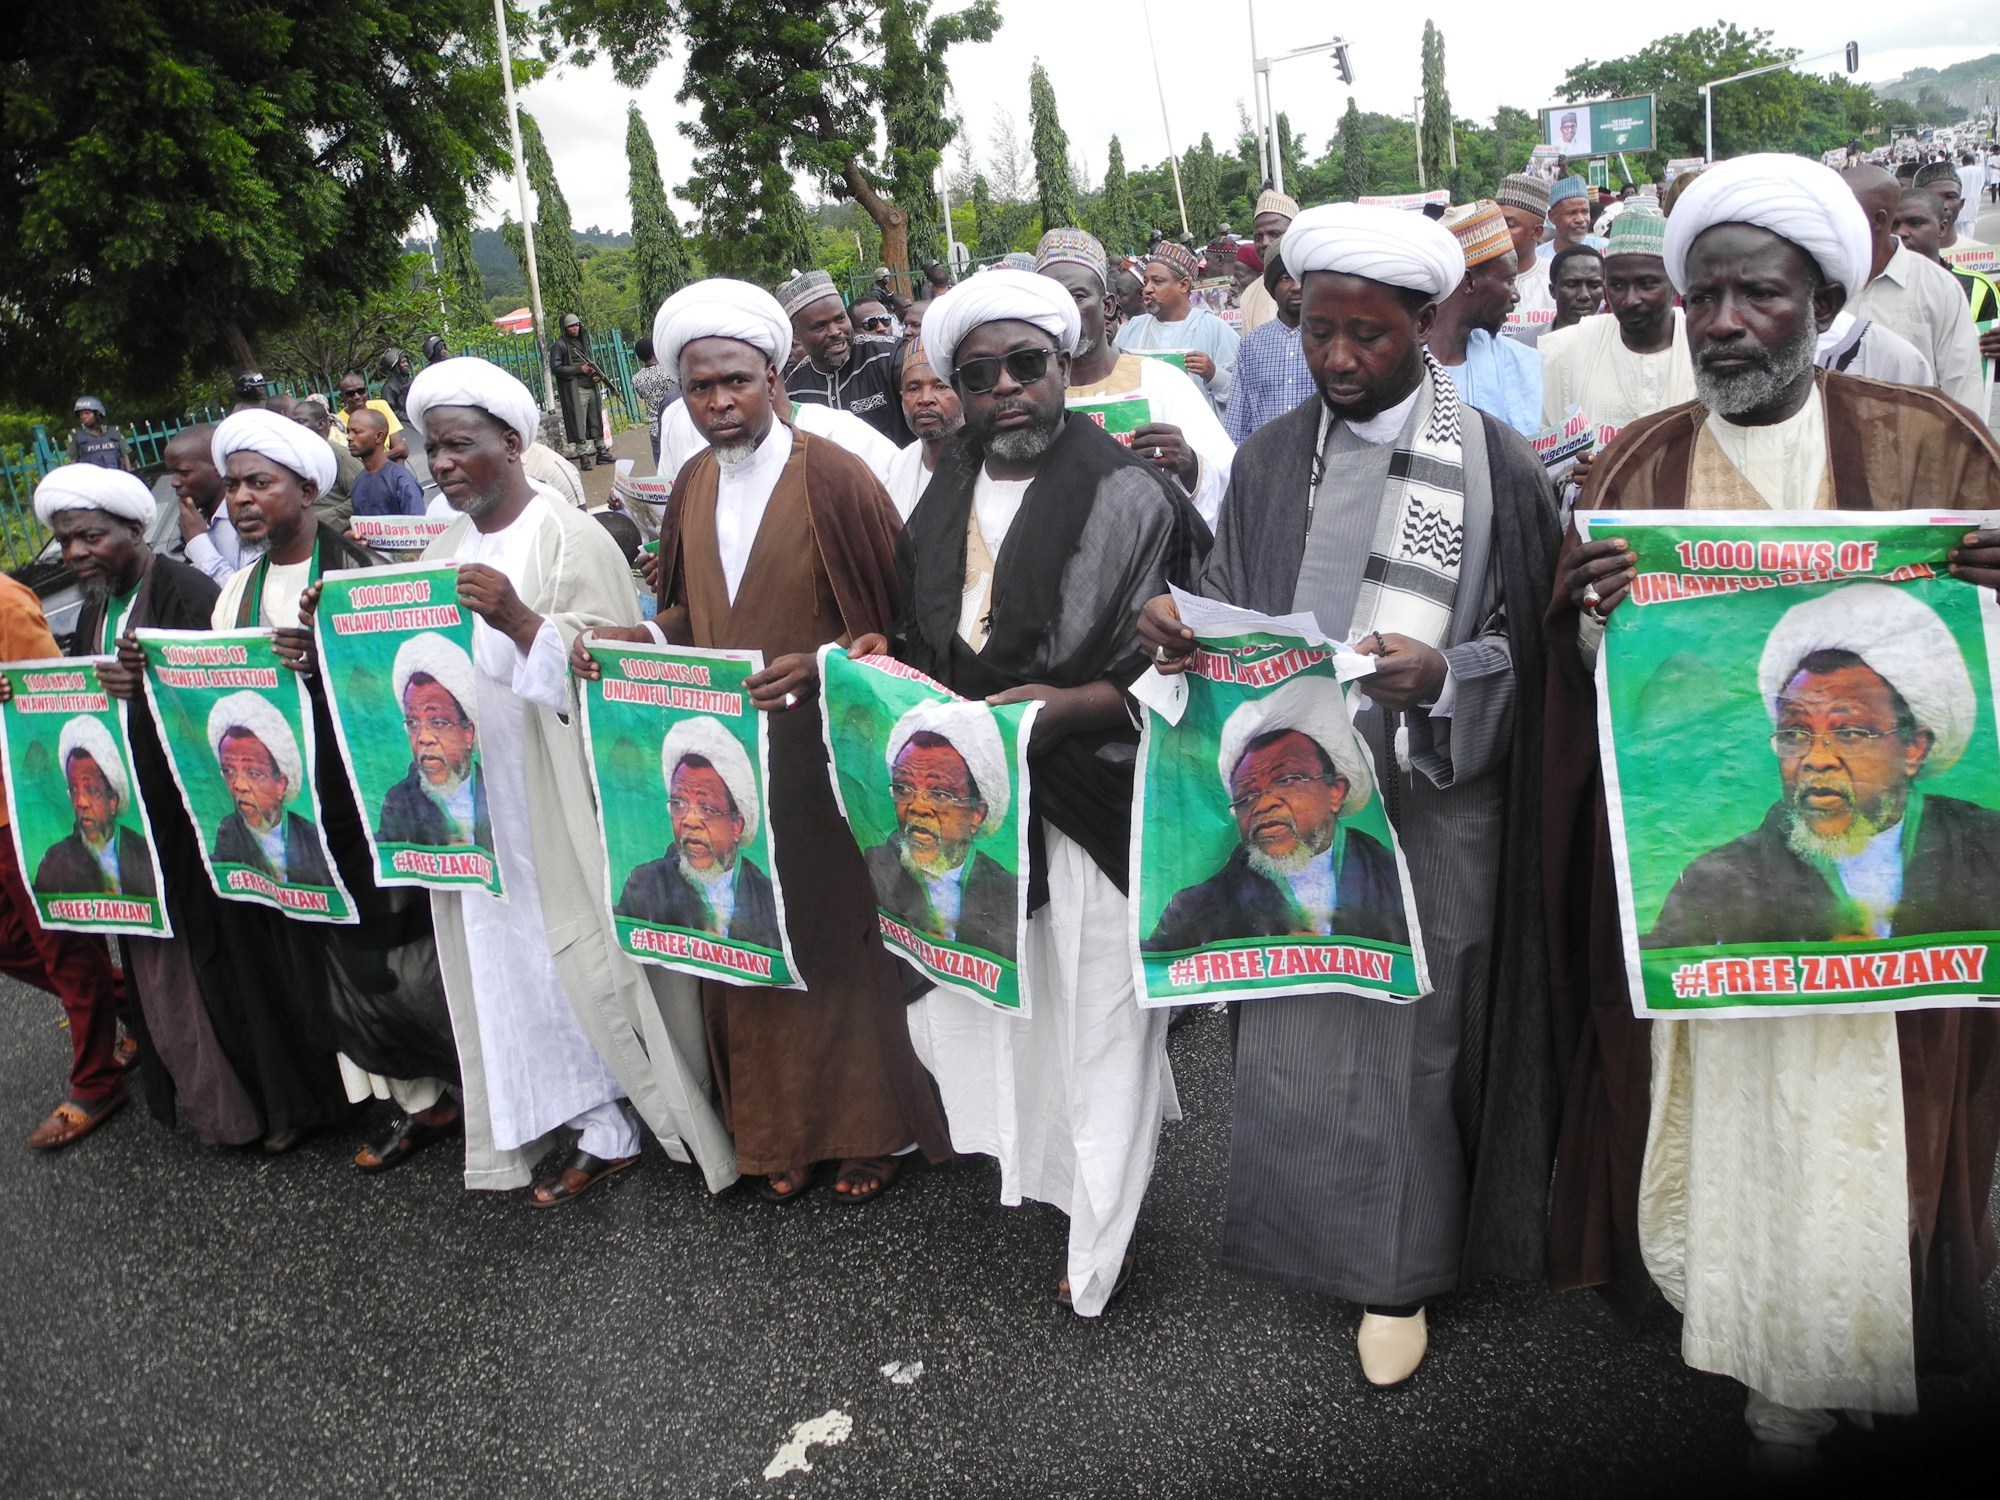 Pic.1.-Islamic-Movement-protest-1000-days-of-detention-of-Sheikh-Ibraheem-Zakzaky-and-wife-in-Abuja